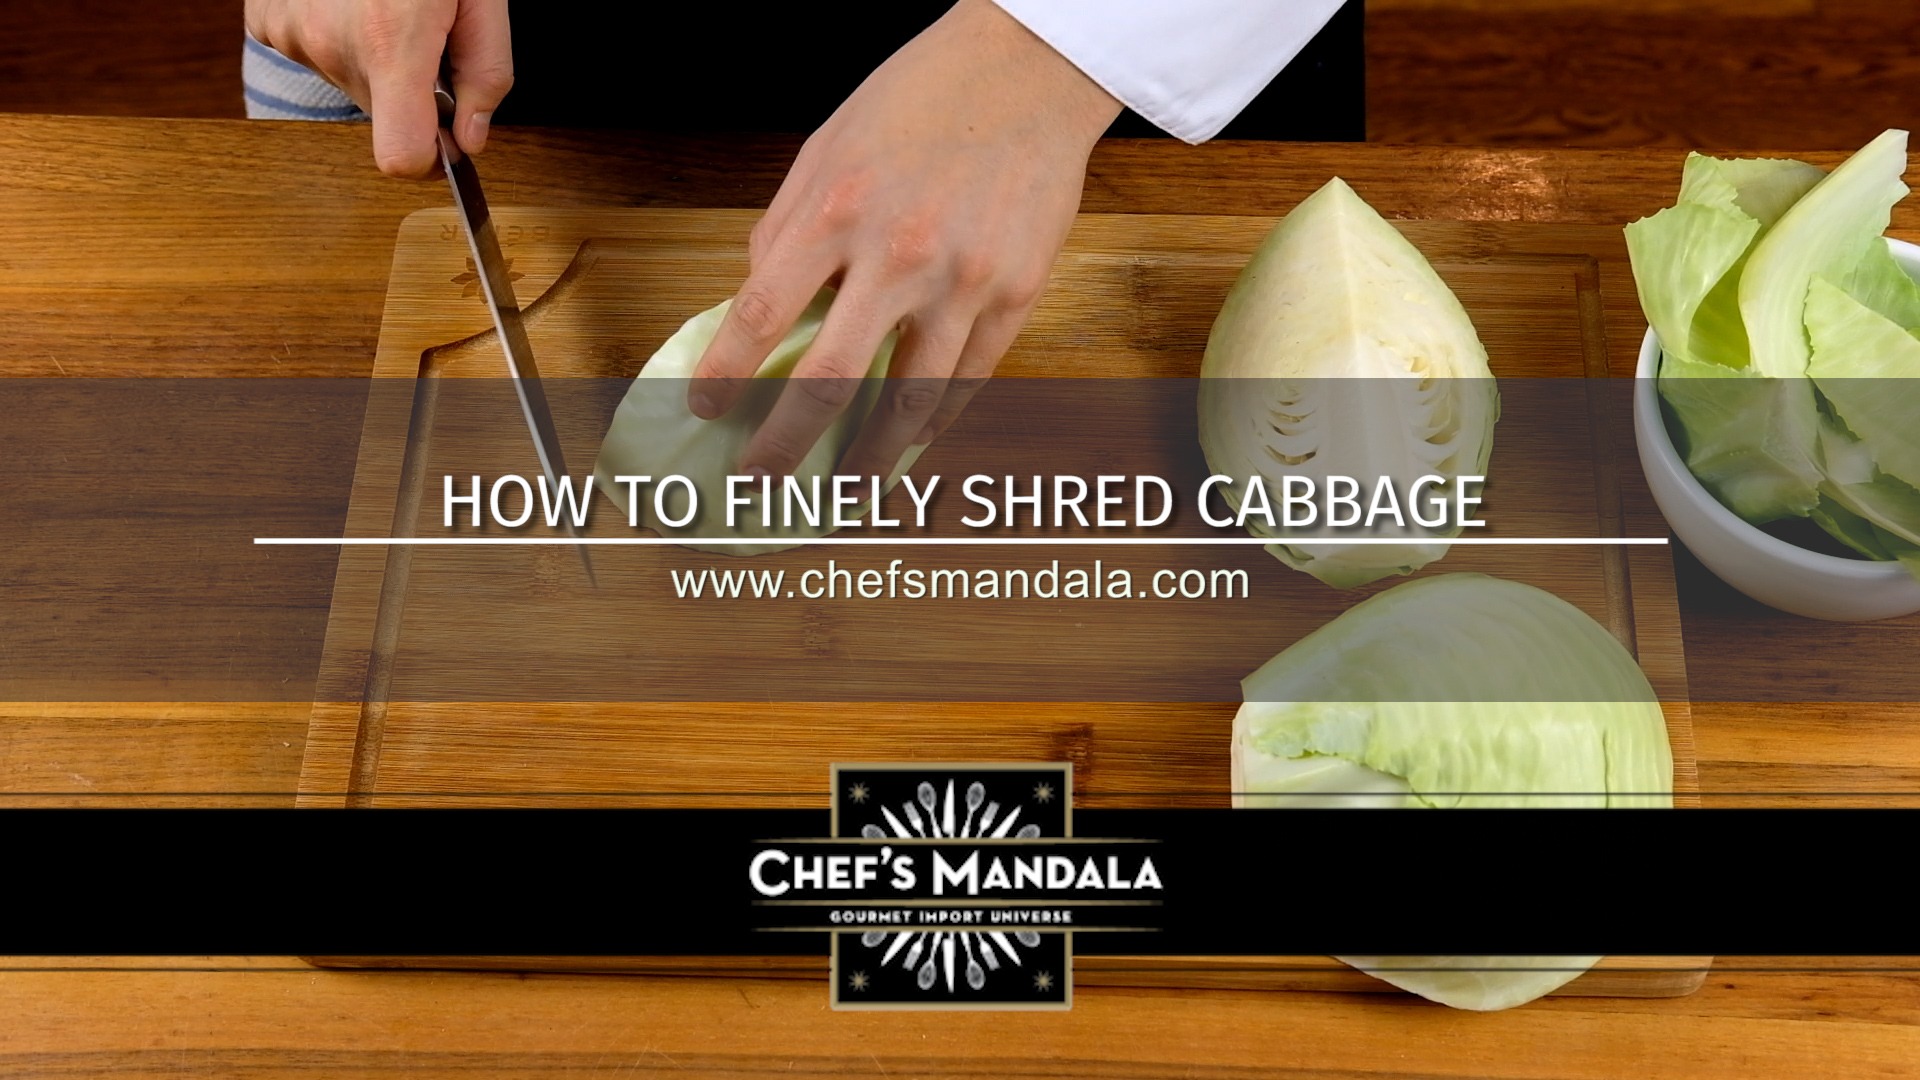 HOW TO FINELY SHRED CABBAGE